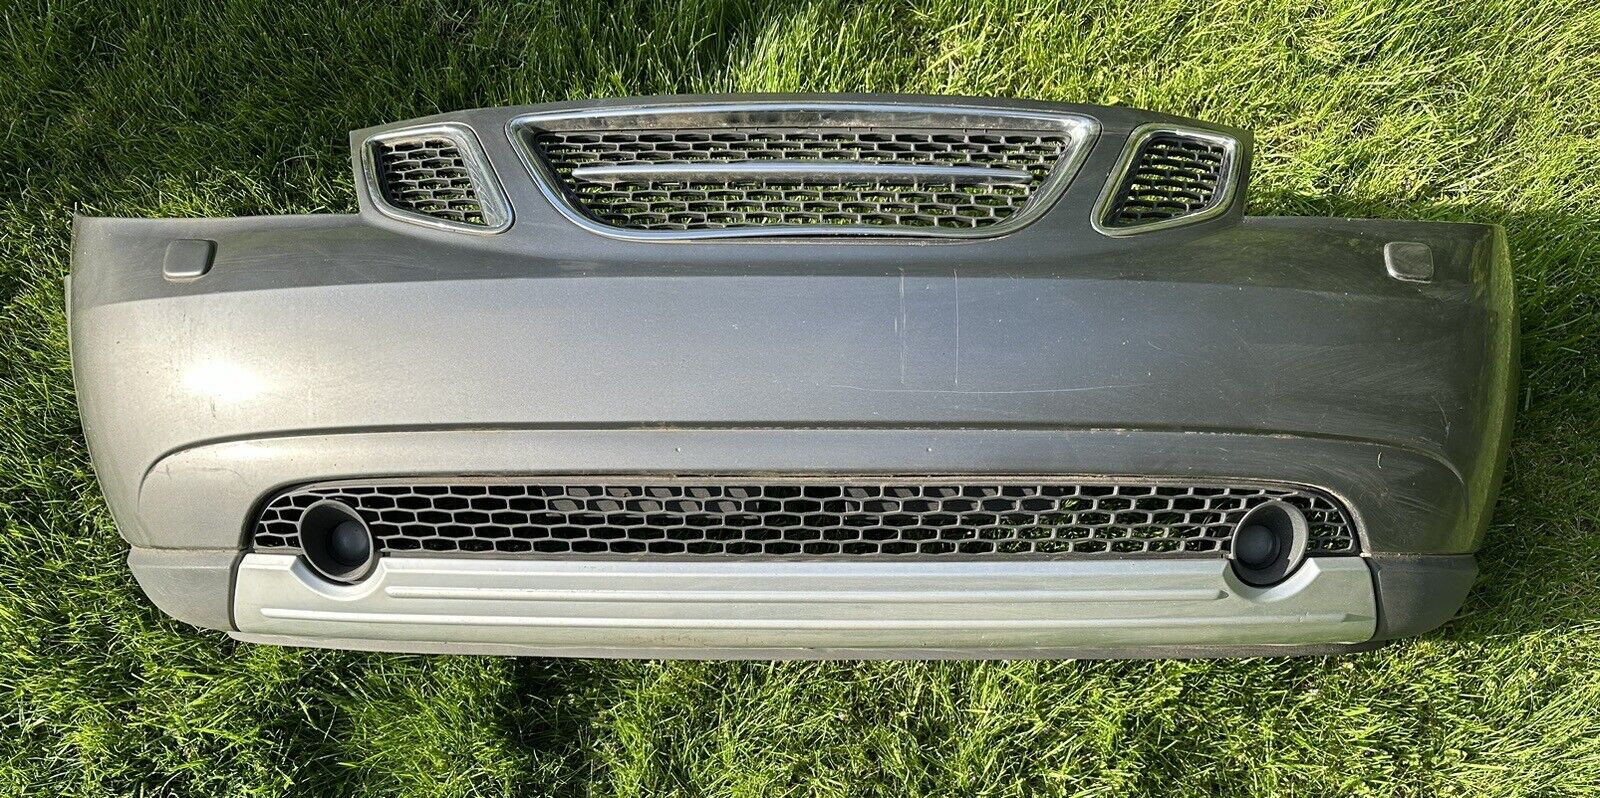 USED 2005-09 SAAB 9-7X FRONT BUMPER COVER PAINTED COMPLETE ASSEMBLY NO CORE RQD